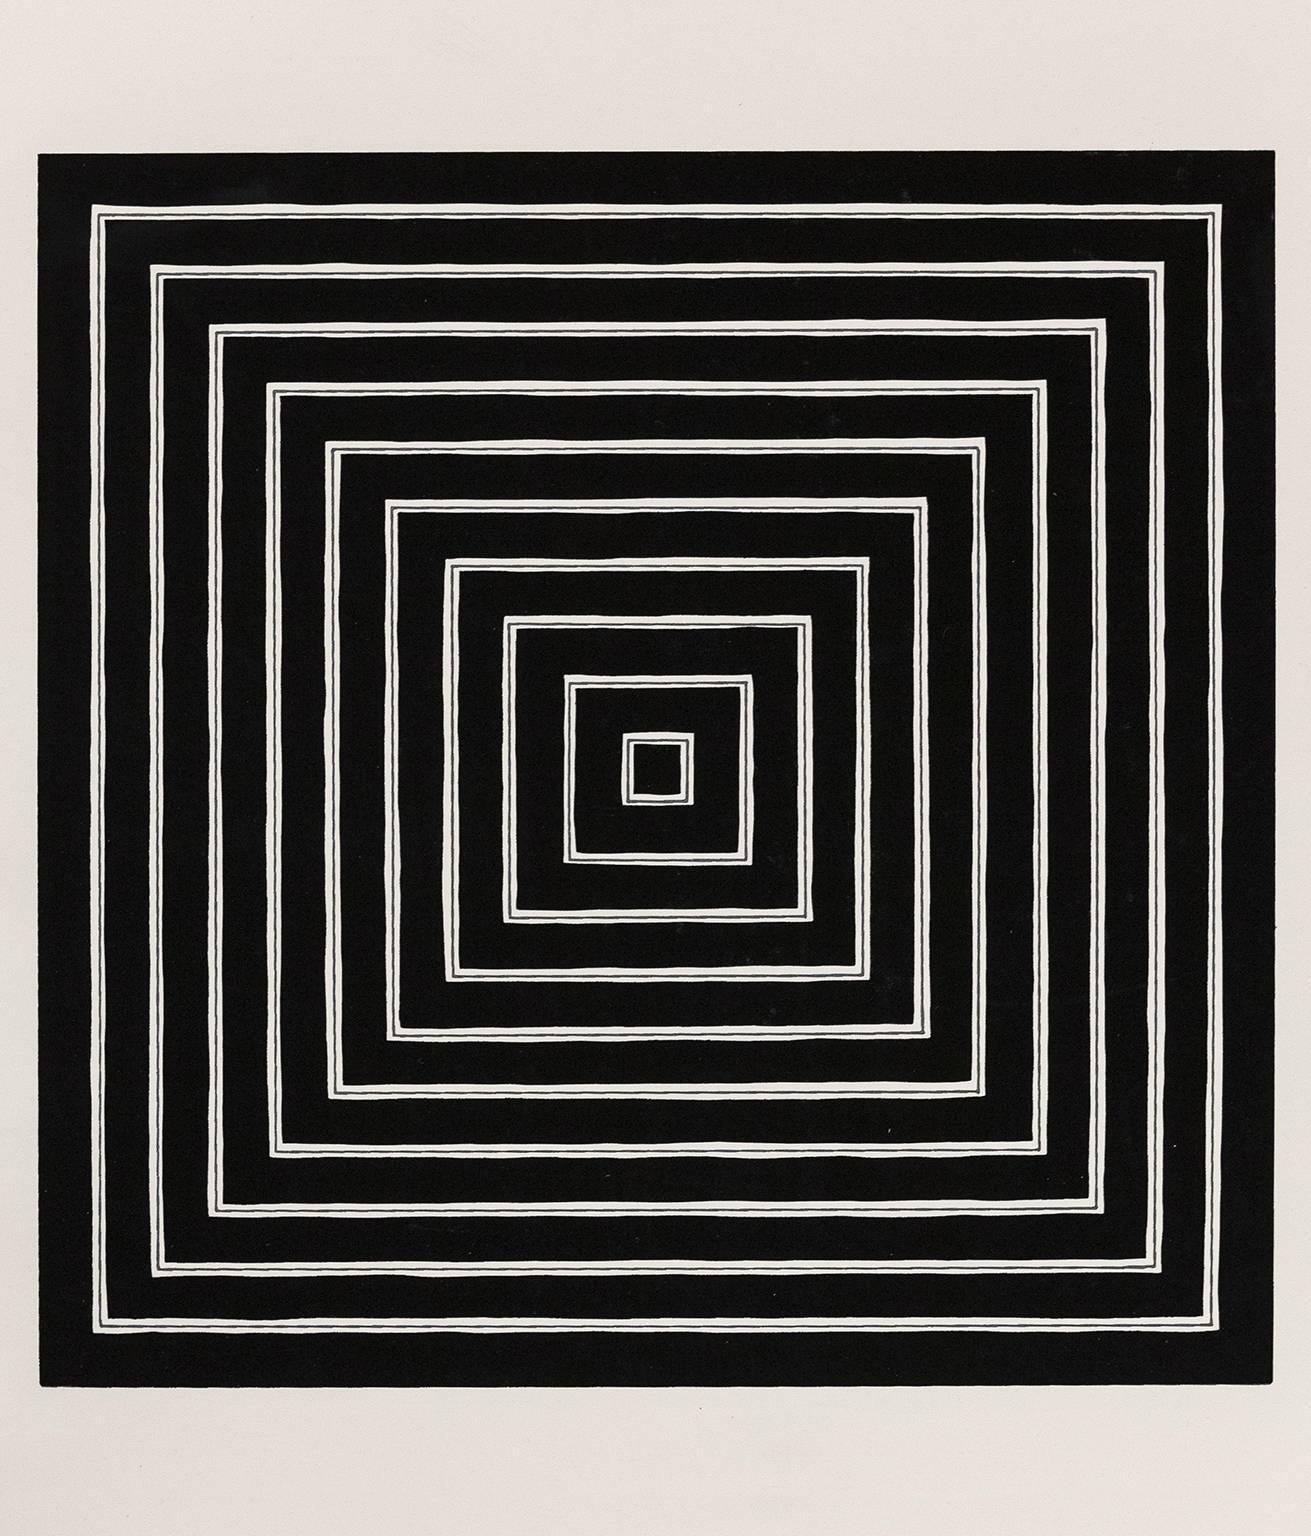 Caviar20 is proud to be offering this exceptional example of Frank Stella's work.

Stella is one of our favorite artists of the 20th century.

His influence can be seen on countless artists including Sol LeWitt, Carl Andre, and Agnes Martin to